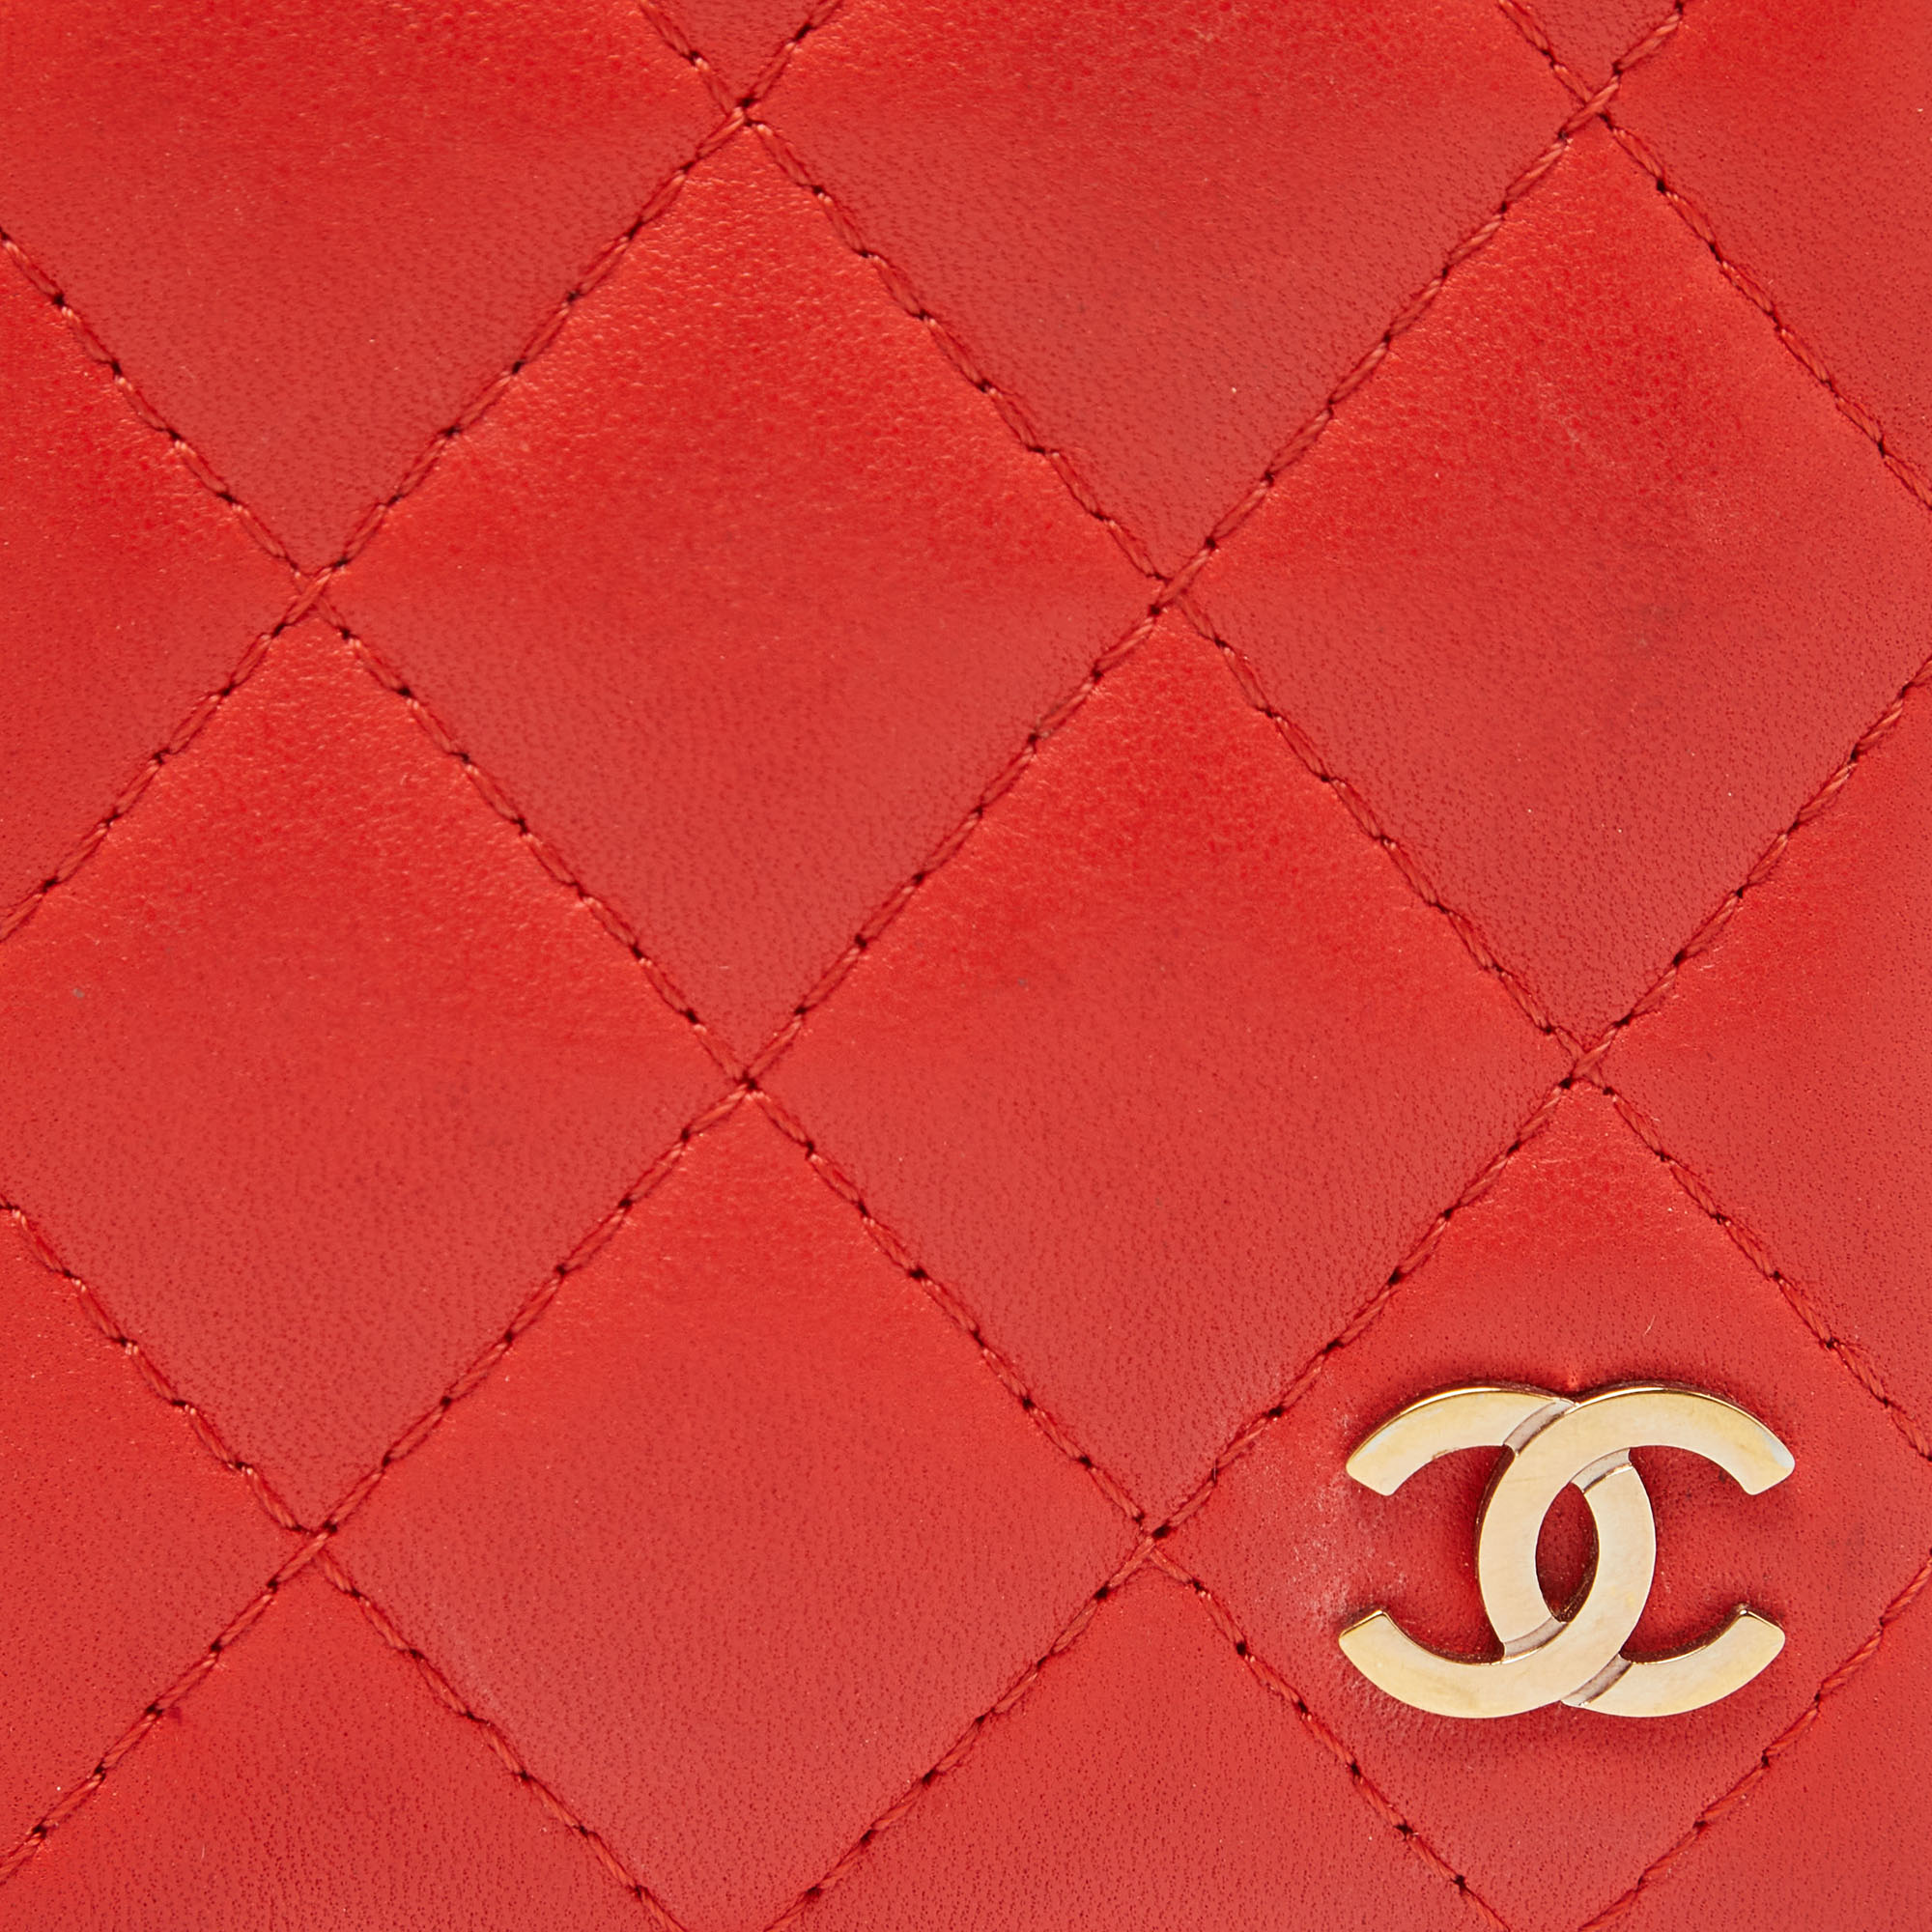 Chanel Orange Quilted Leather CC Logo Card Case